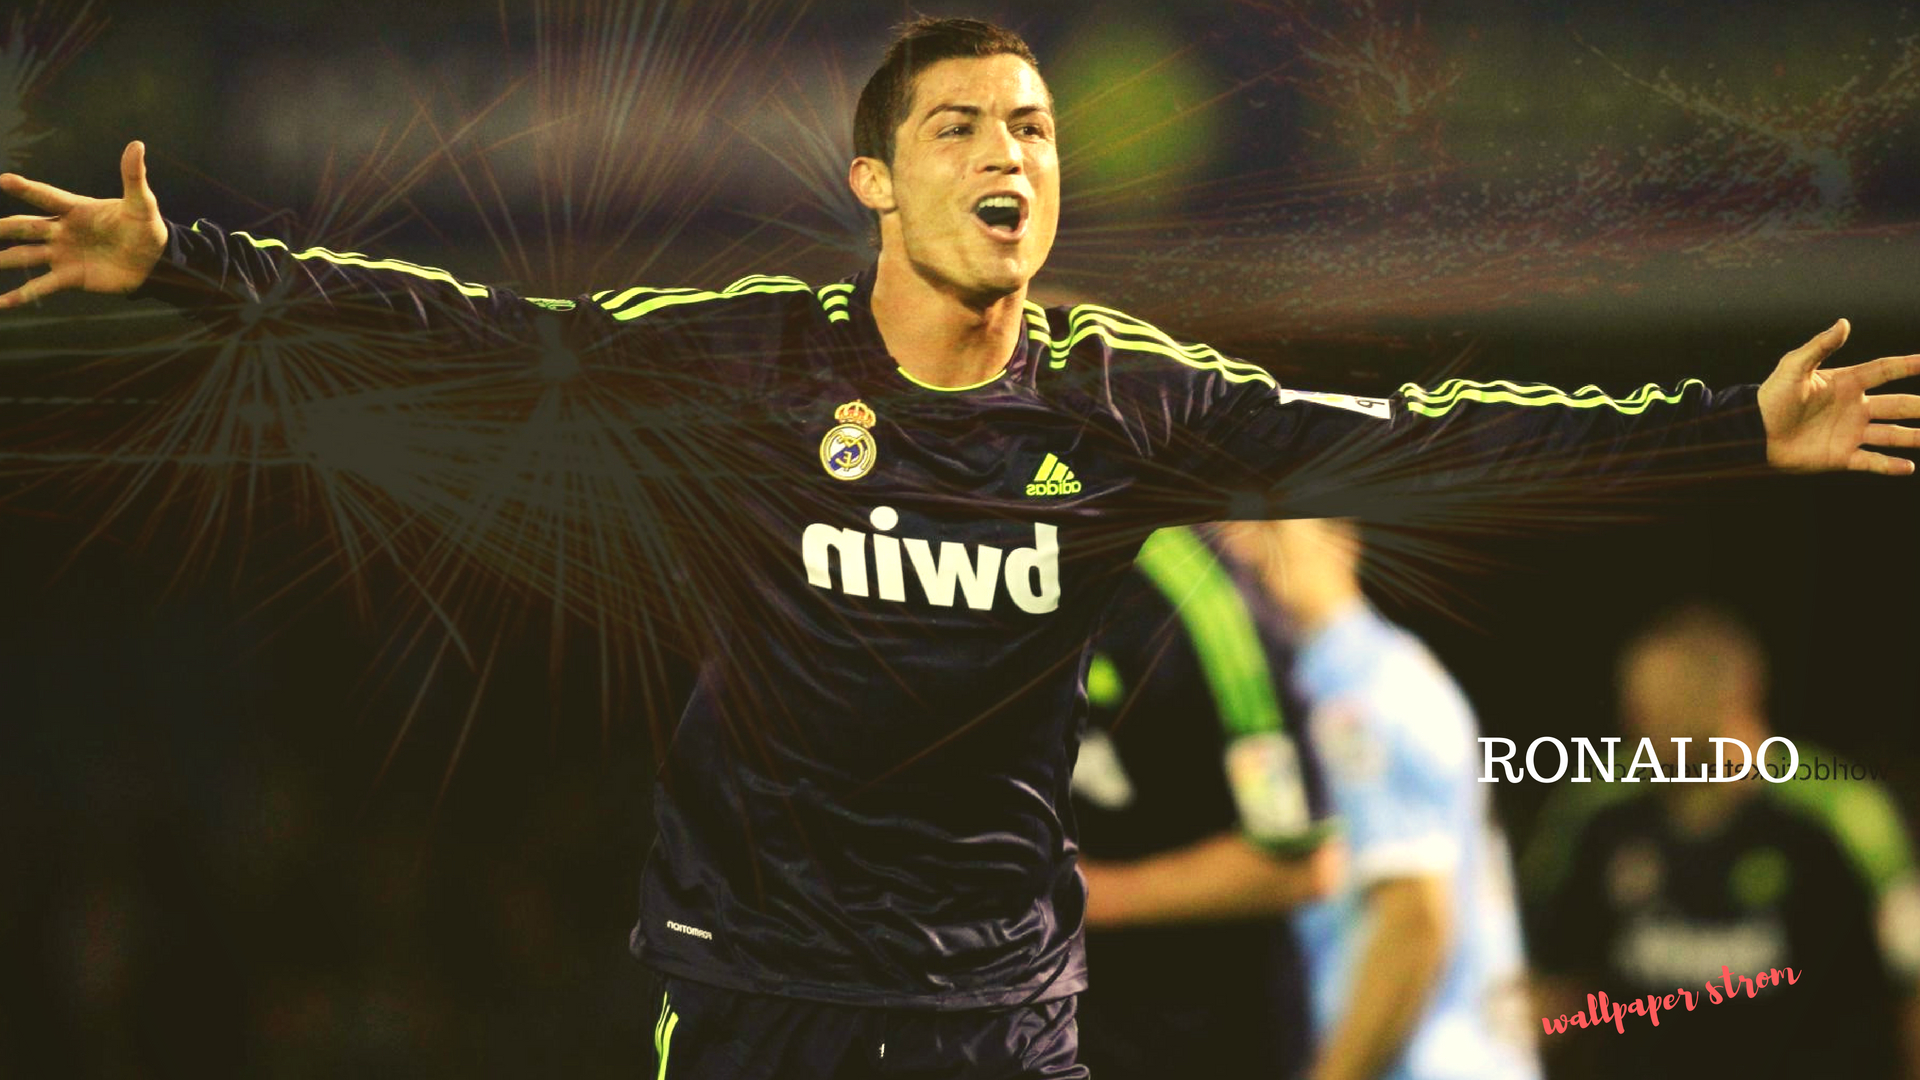 Cristiano Ronaldo Hd Wallpapers Download Free - Player - 1920x1080 ...